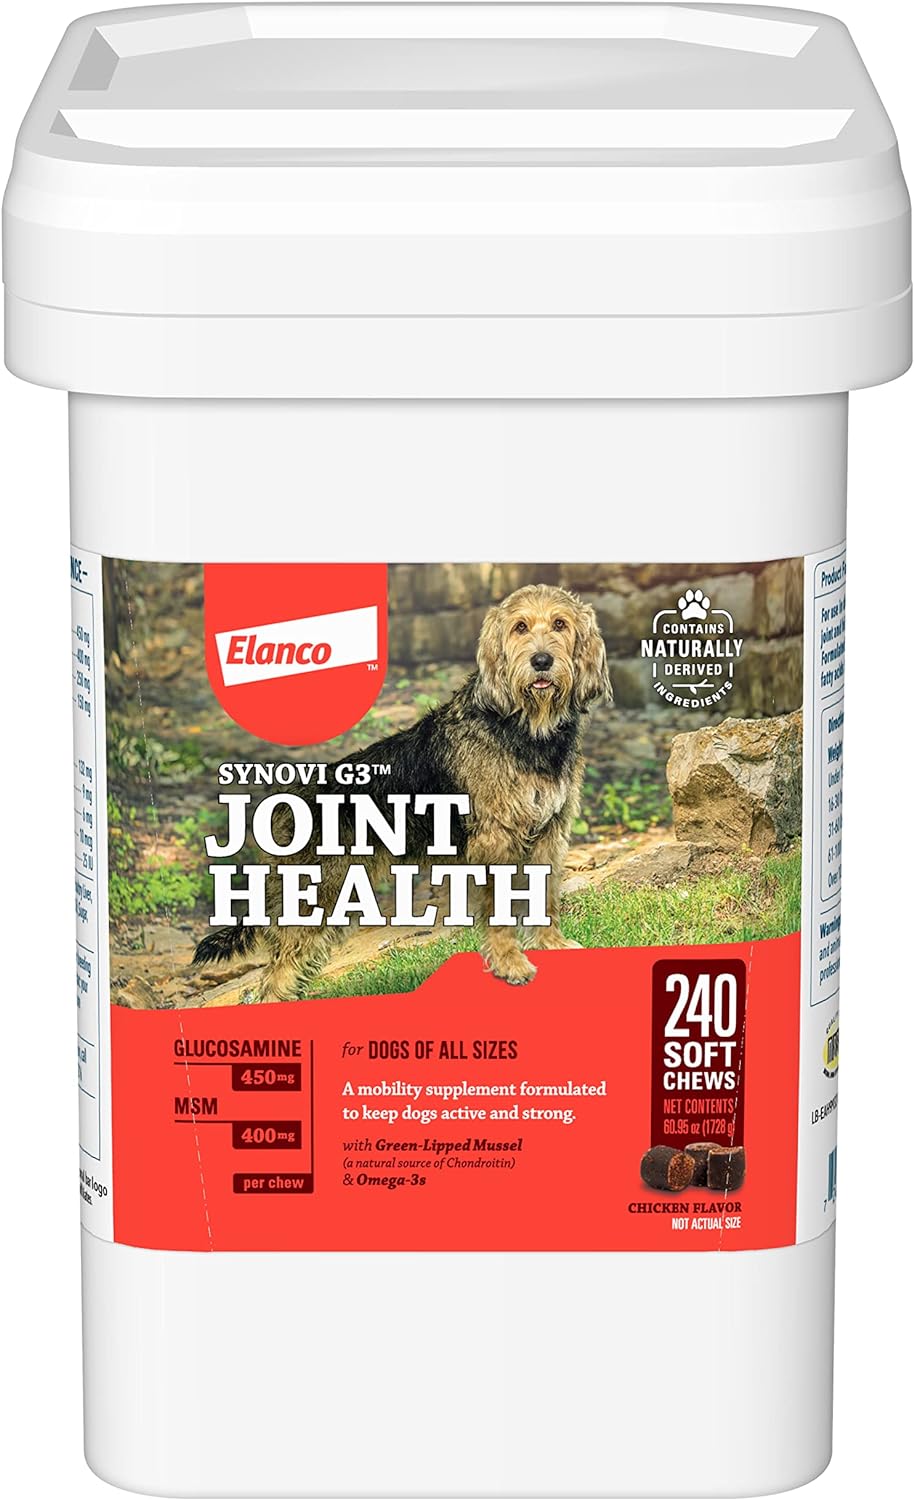 Elanco Synovi G3 Soft Chews Glucosamine Joint Supplement for Dogs, 240 count